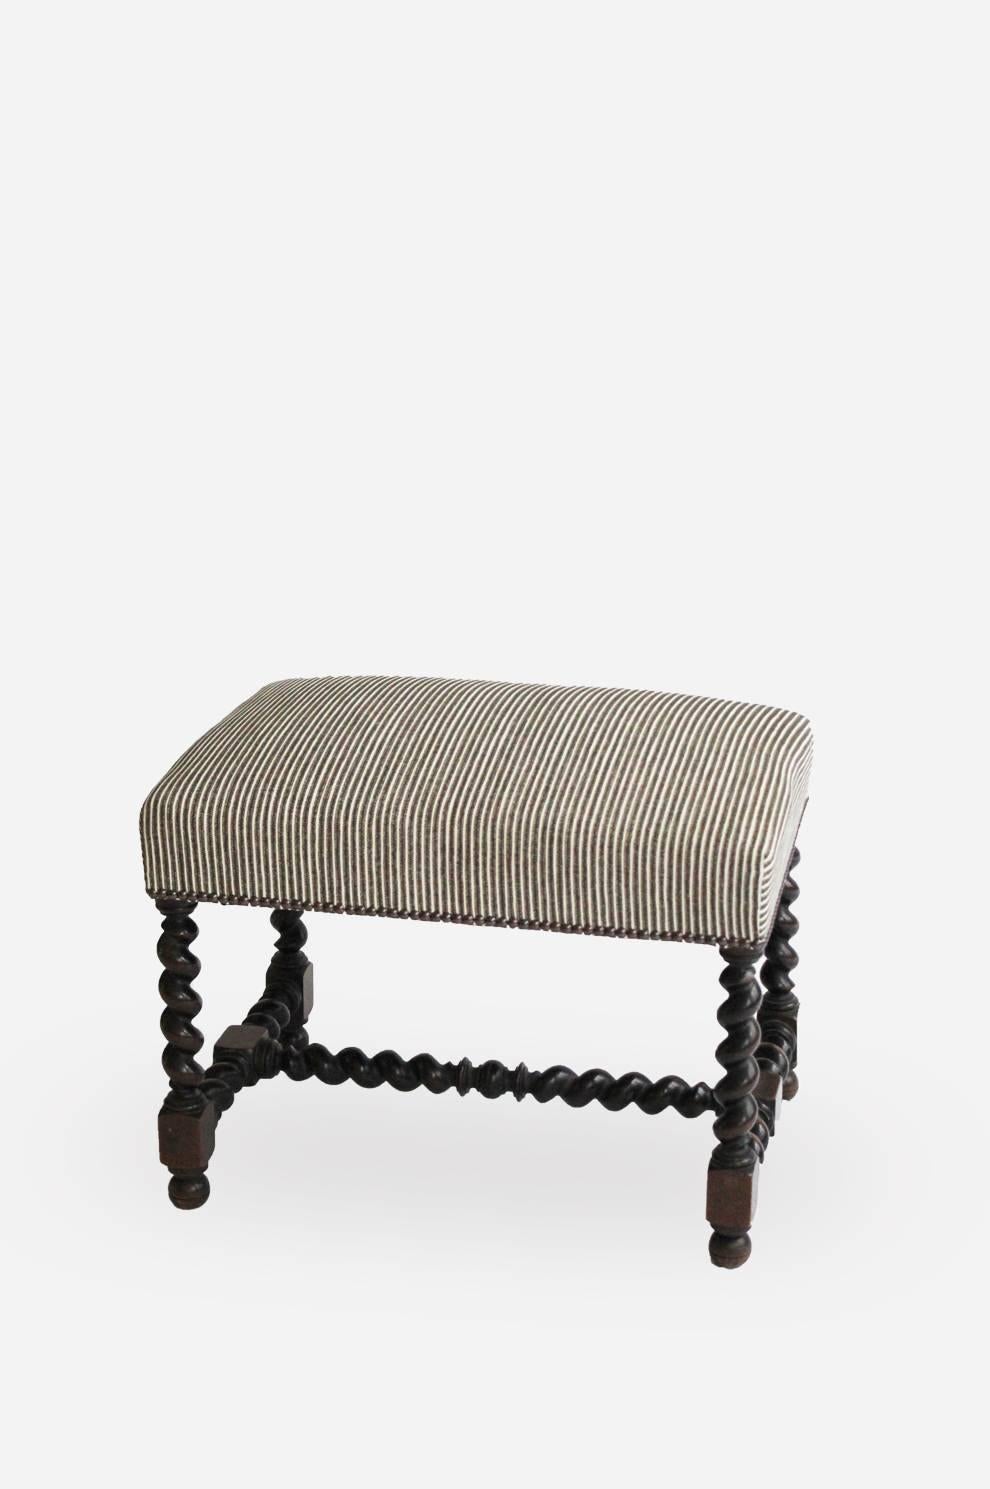 Antique, French reupholstered ottoman. 

Fully restored and reupholstered in Fermoie khaki and off-white cotton upholstery.